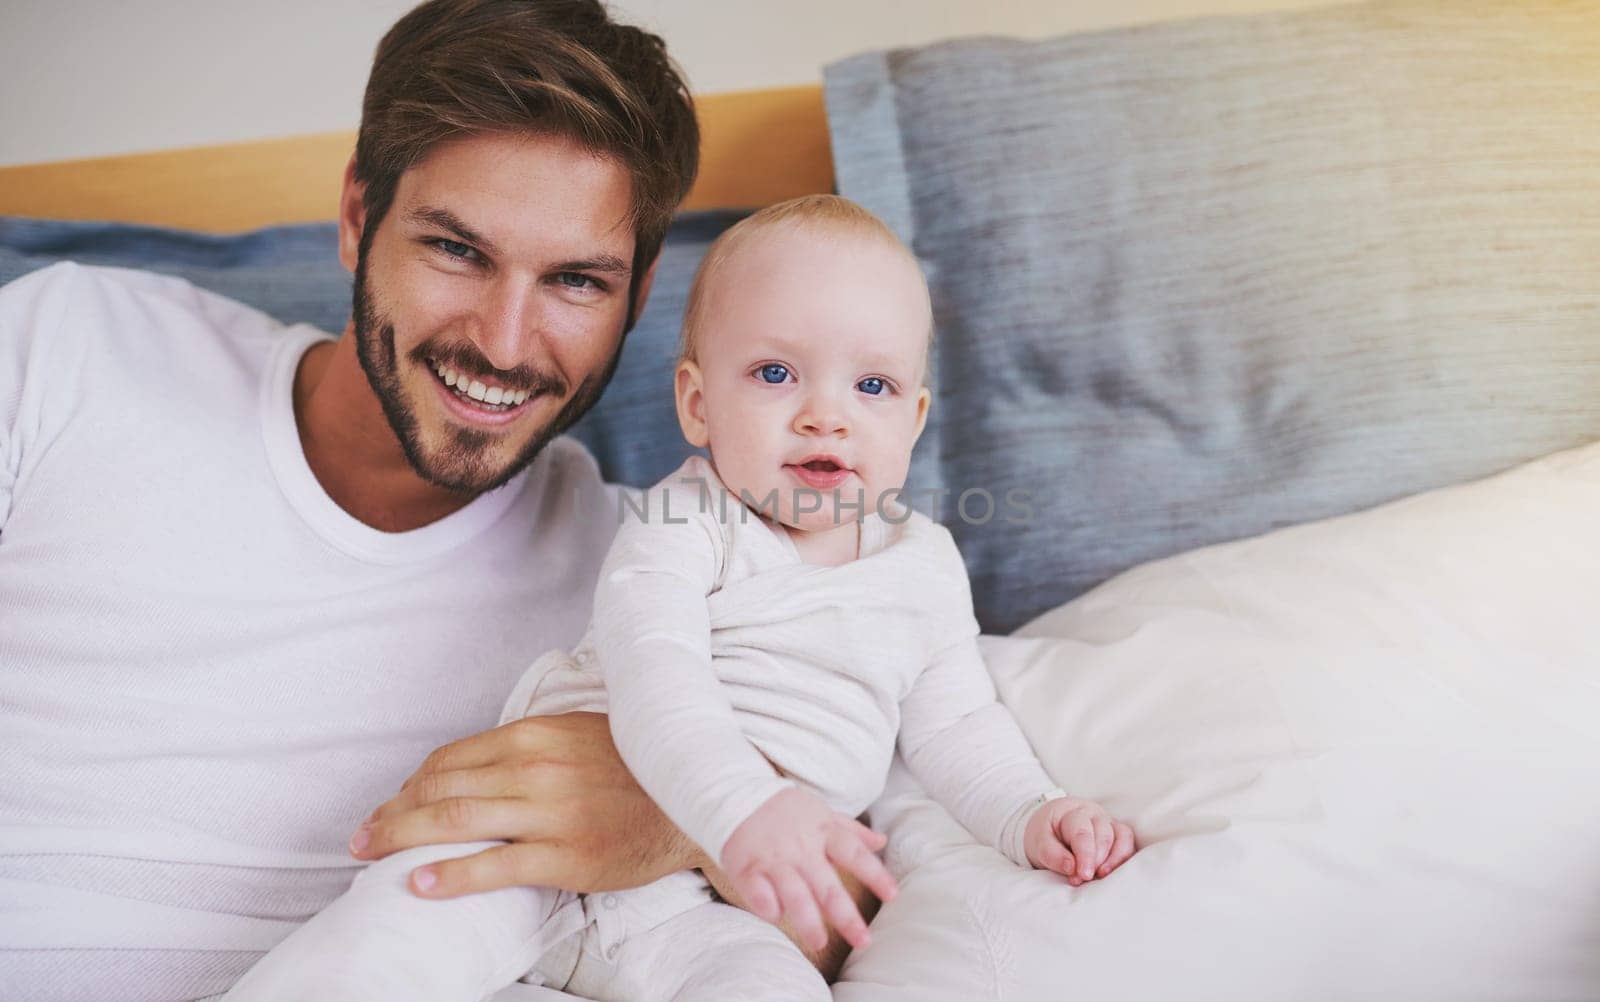 Bedroom, happy and portrait of father with baby for bonding, relationship and love for parenting. Family, home and dad with newborn infant on bed for child development, support and childcare in house by YuriArcurs